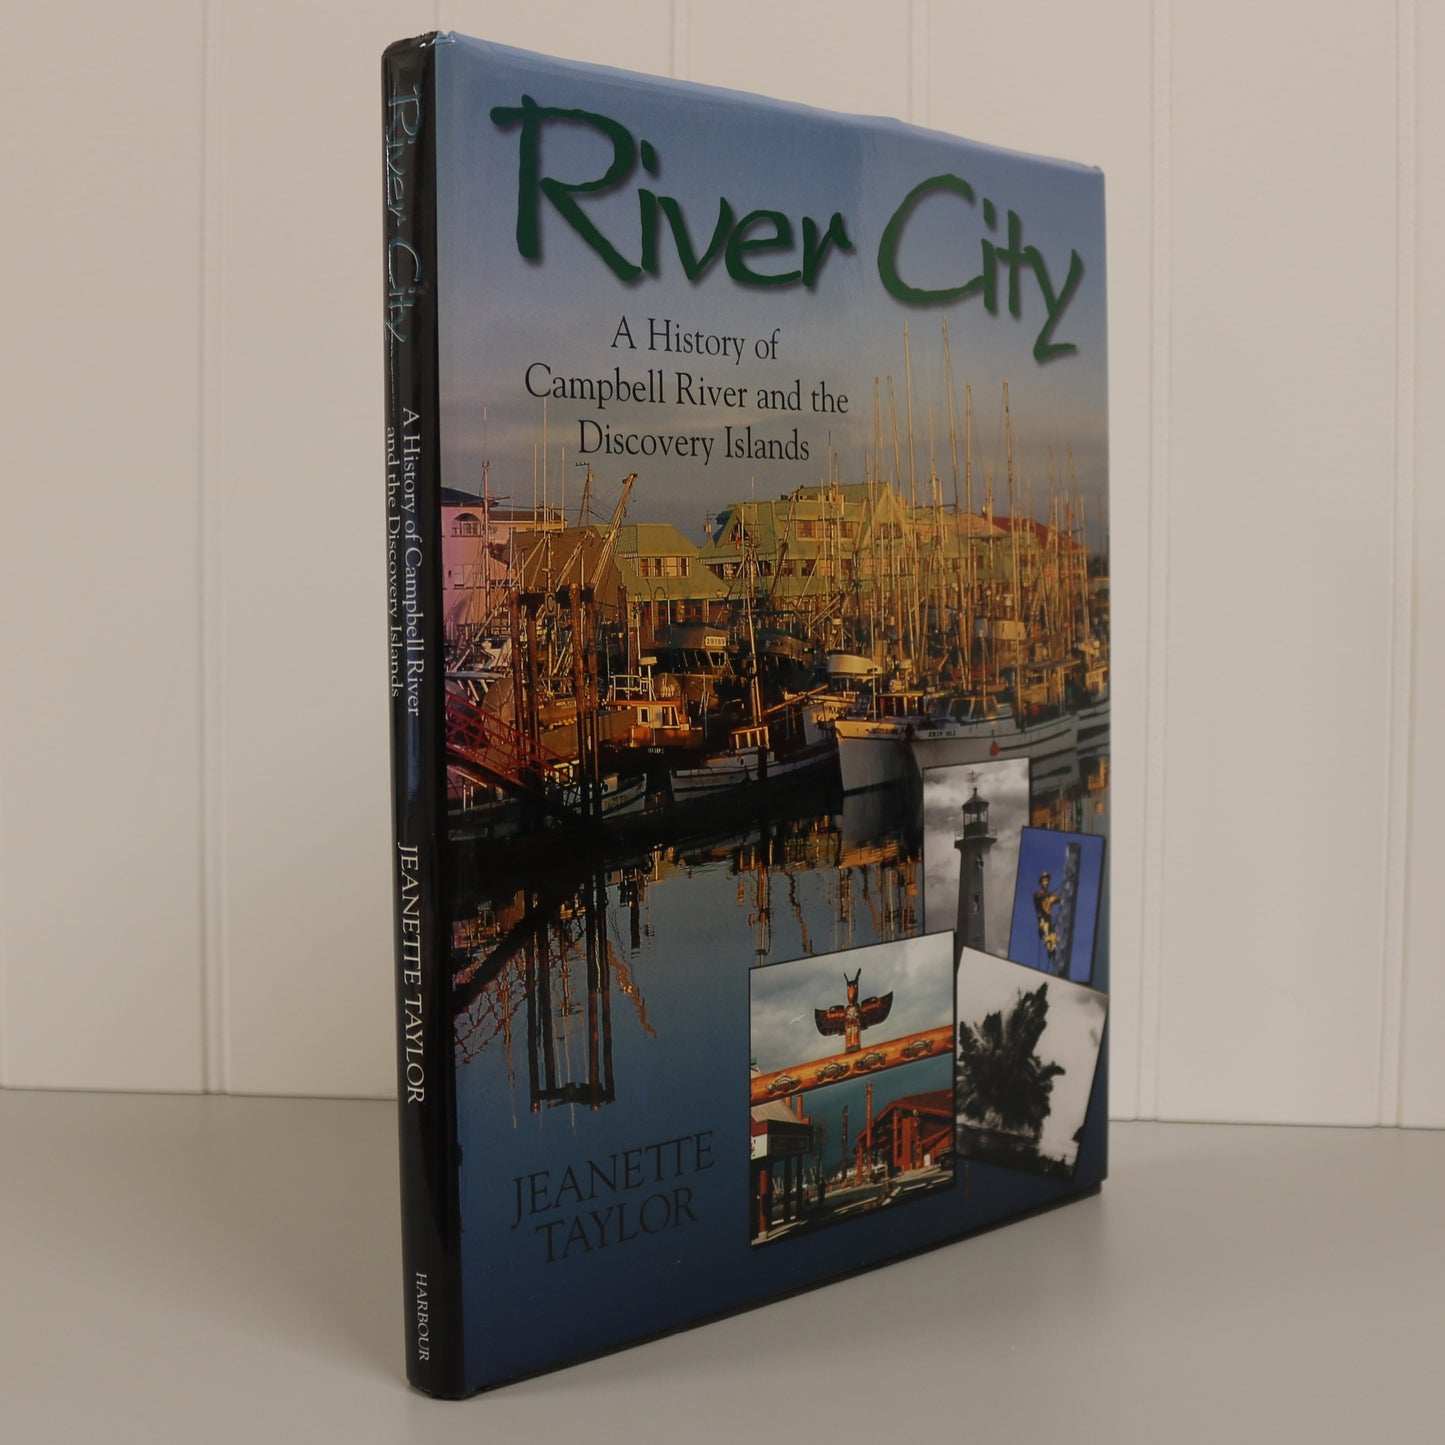 Campbell River City Discovery Islands BC British Columbia Canada Local History Book